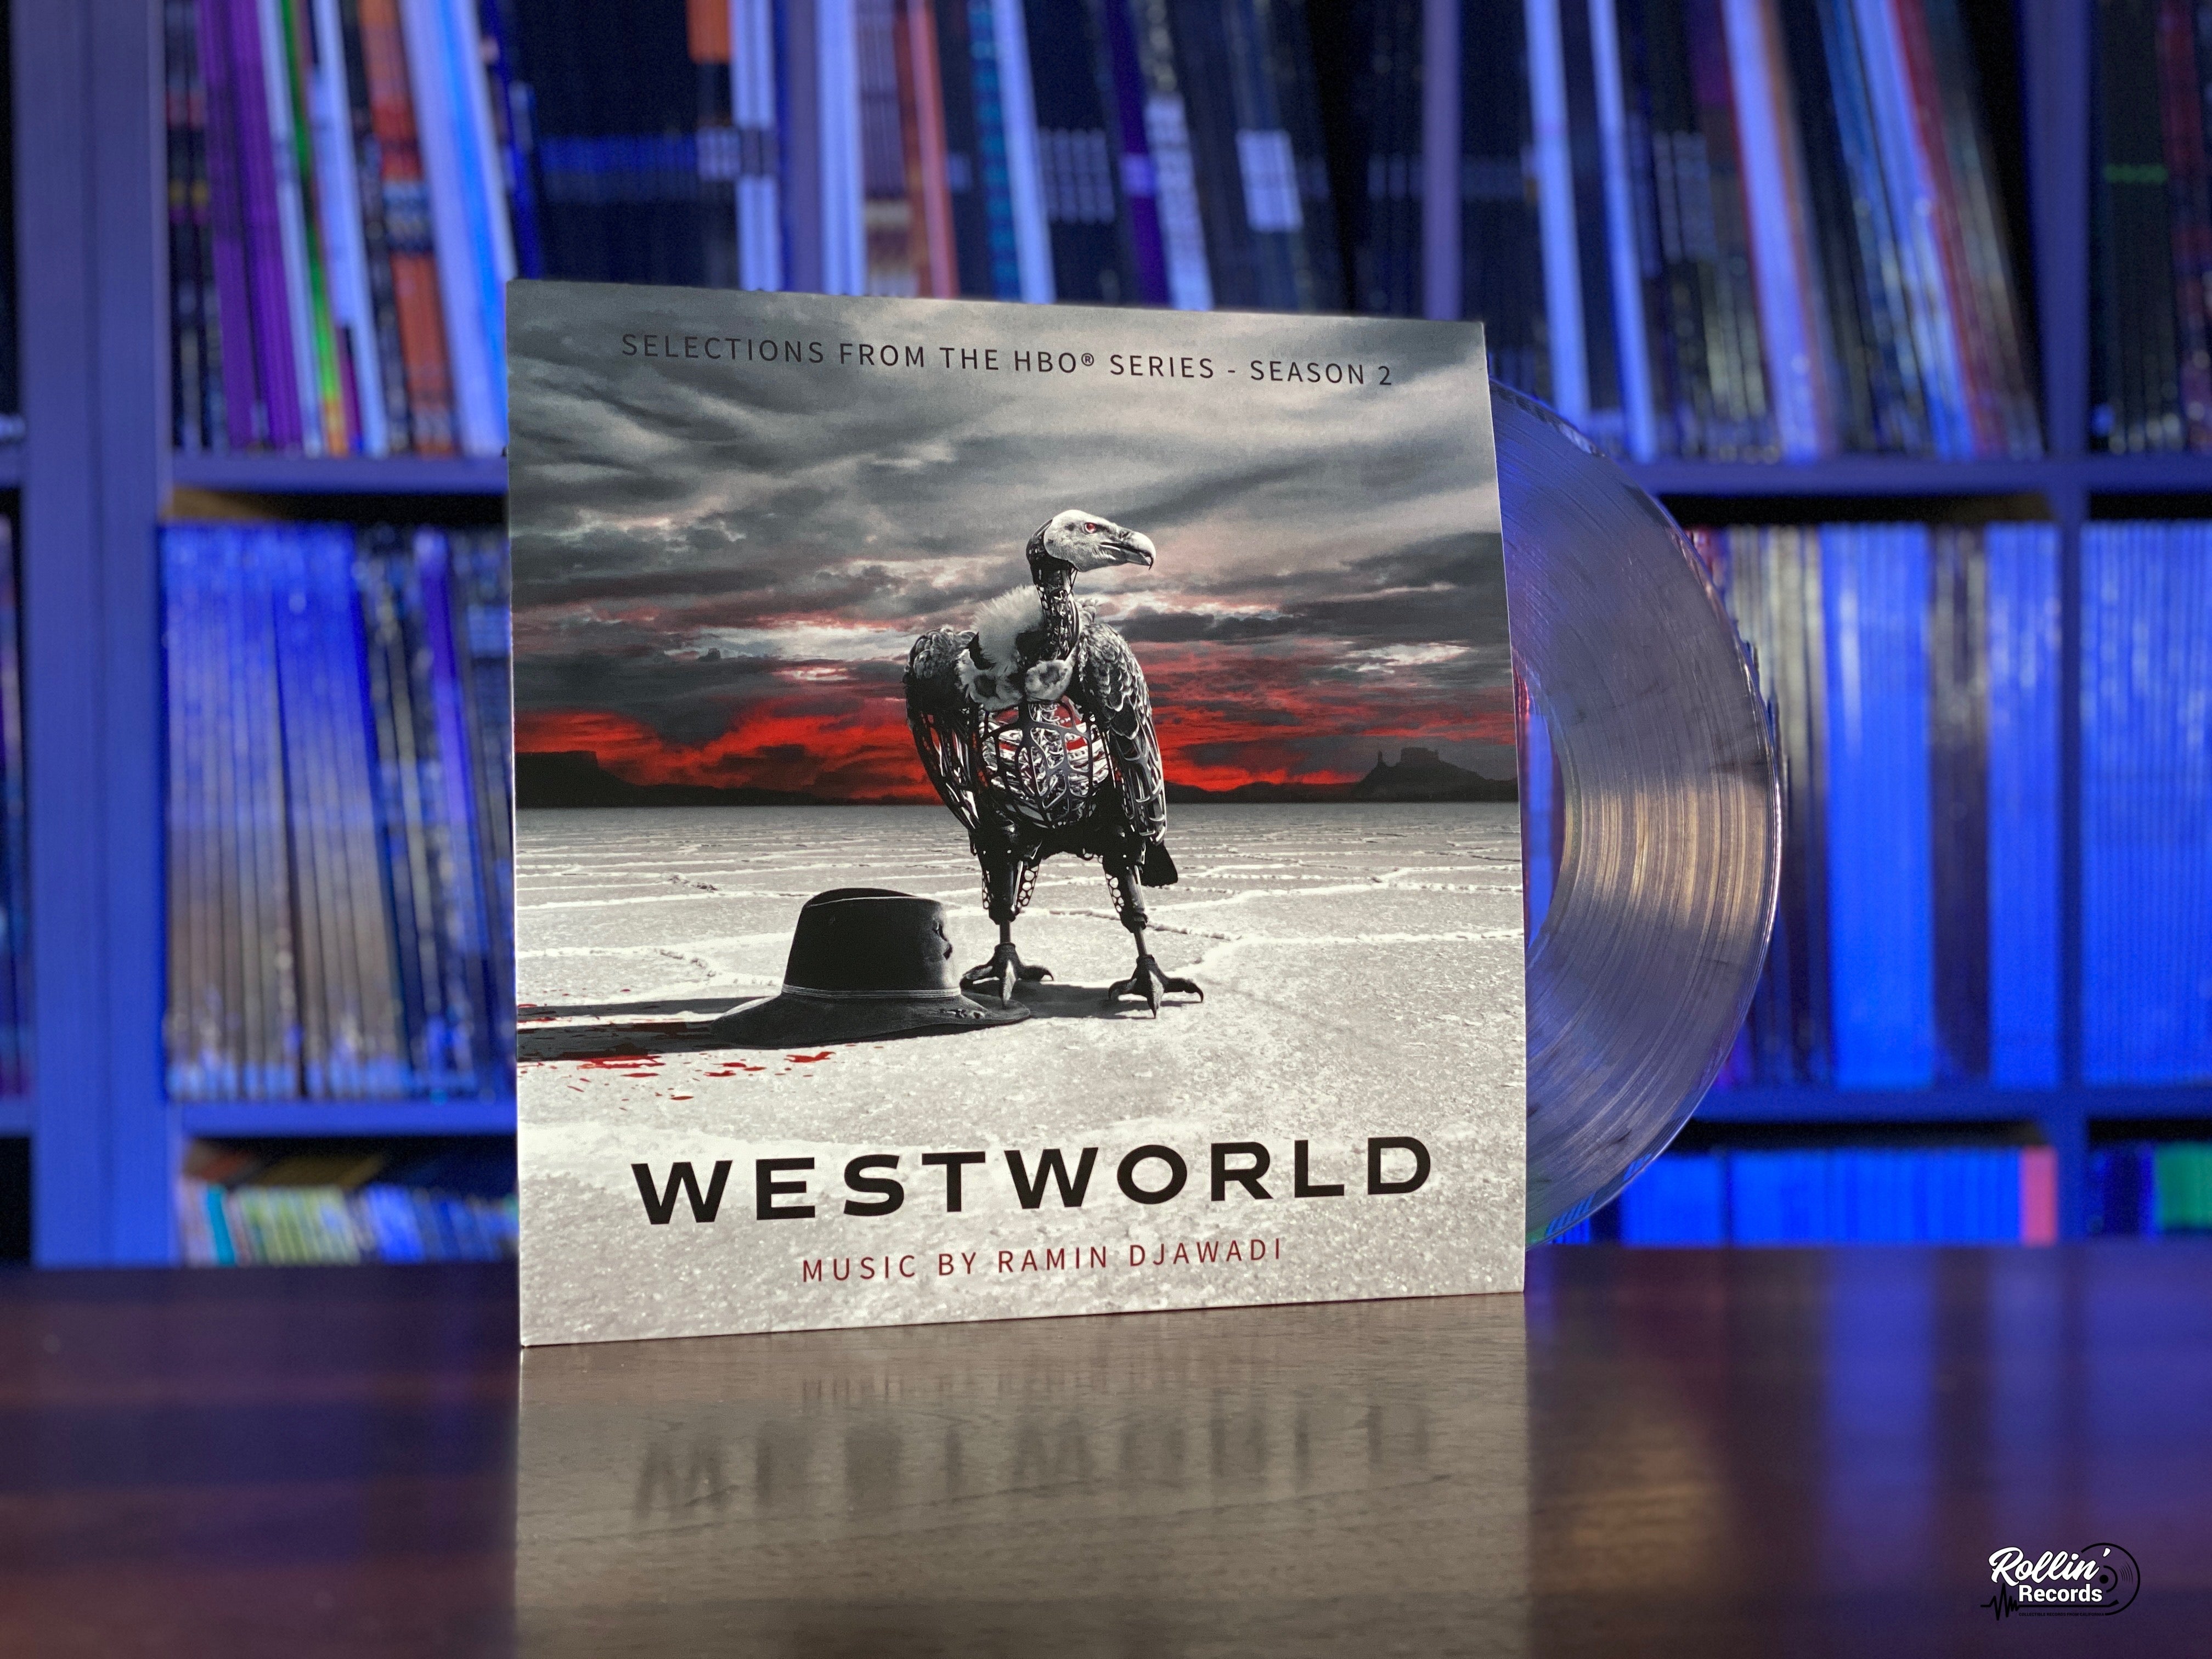 Westworld: Season 1 (Music from the HBO Series) - Album by Ramin